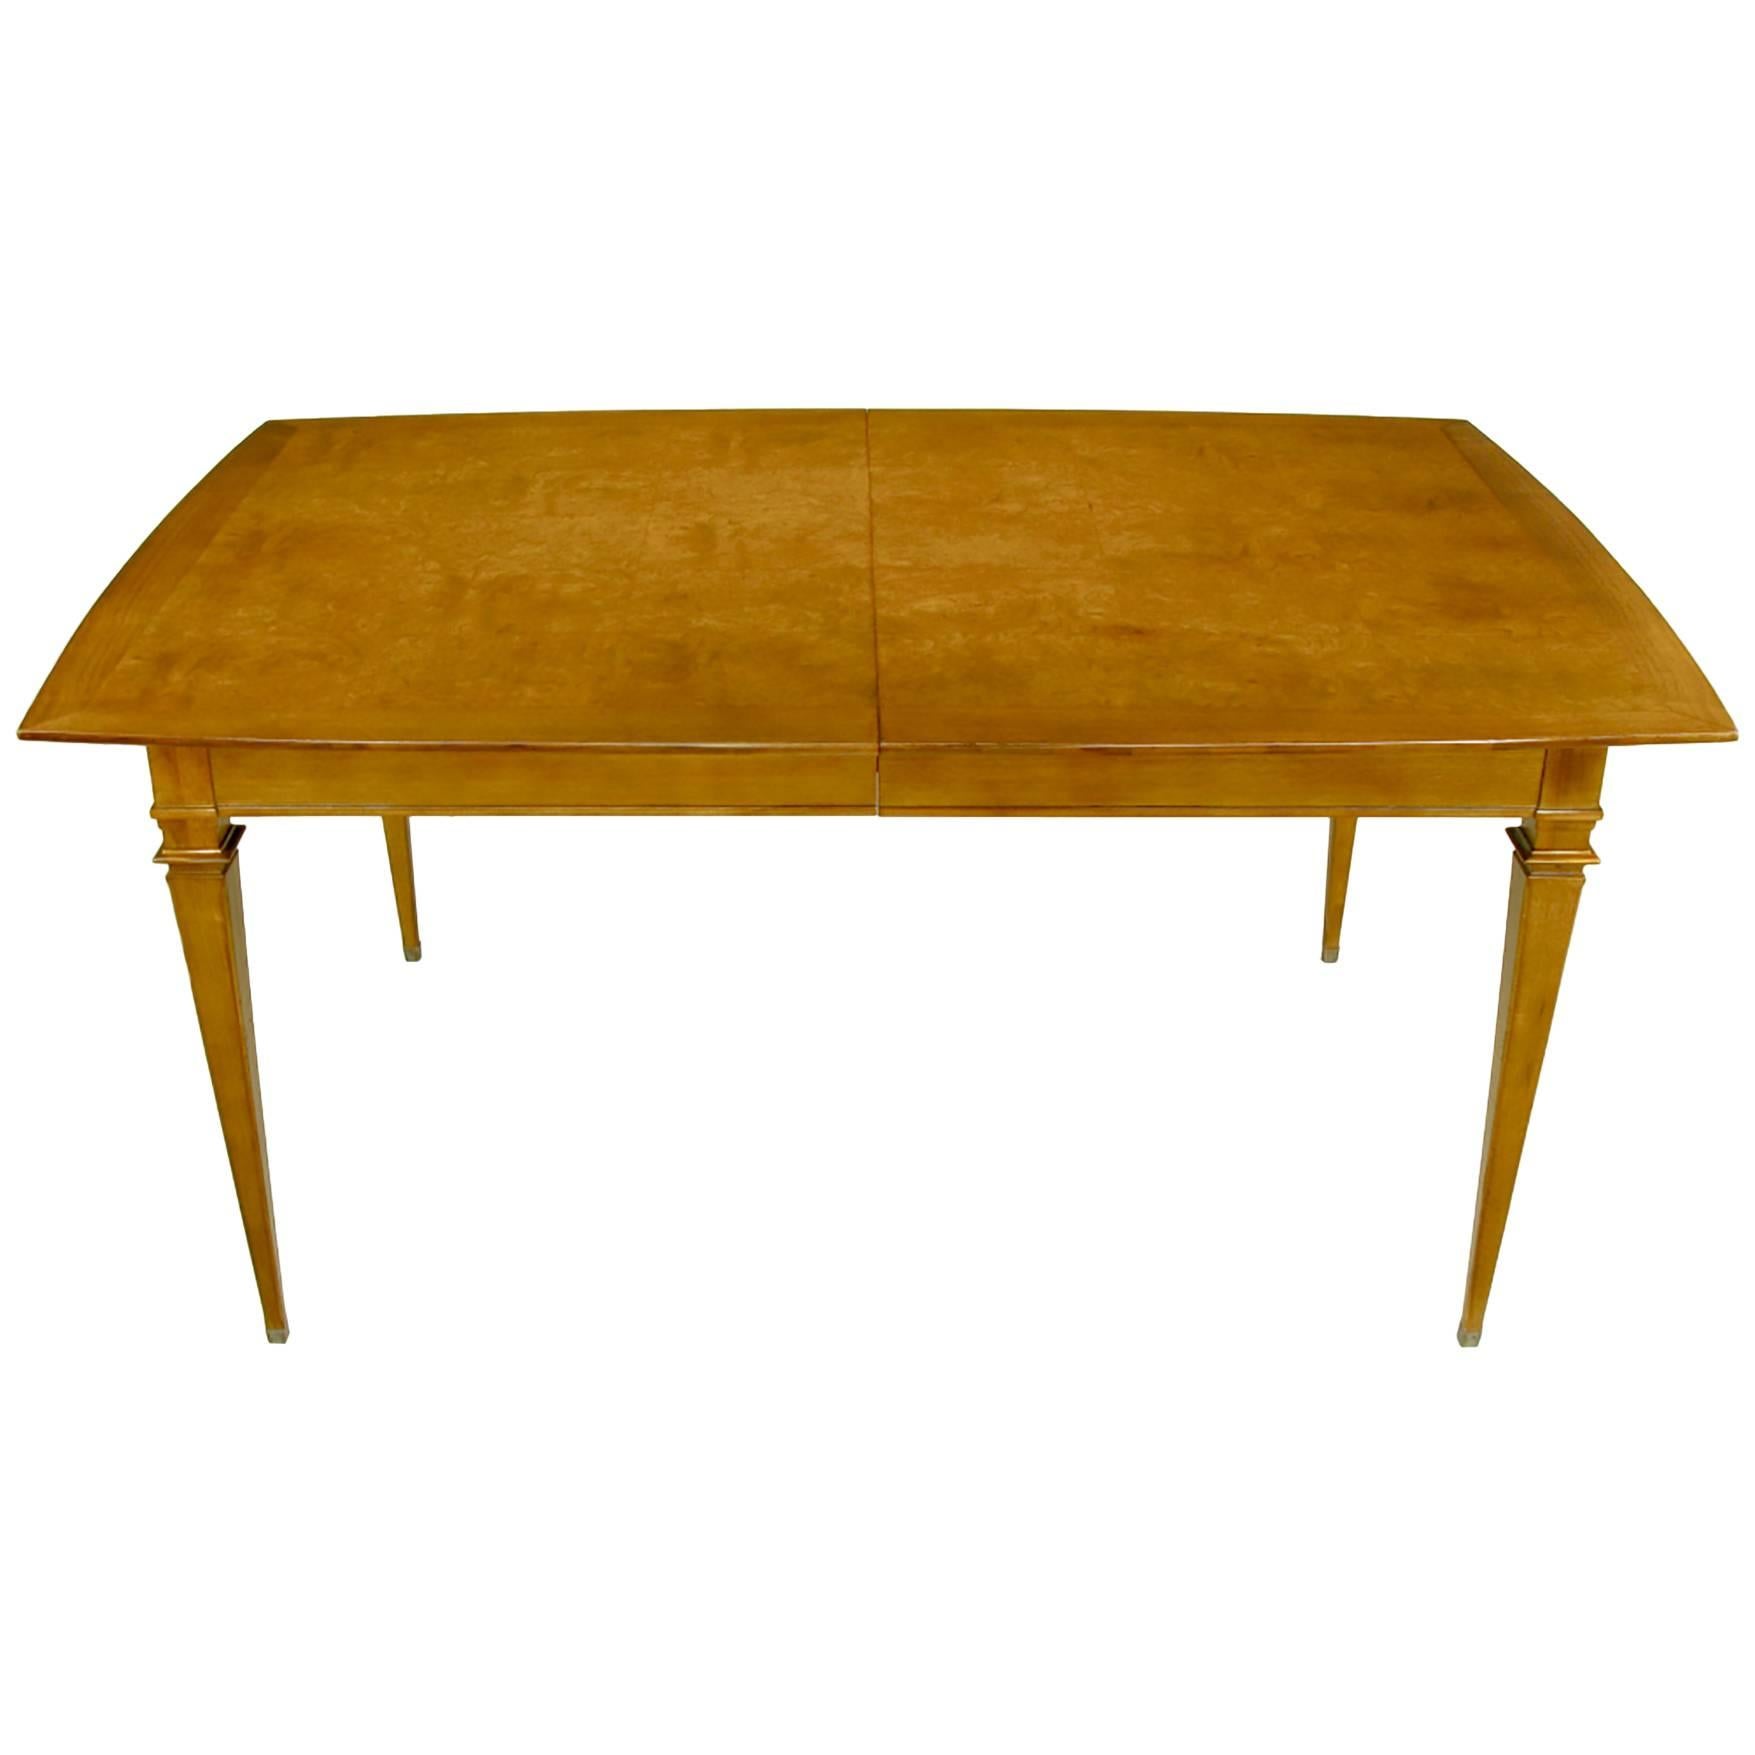 Empire Style Burled Walnut Parquetry Top Dining Table with Copper Accent For Sale